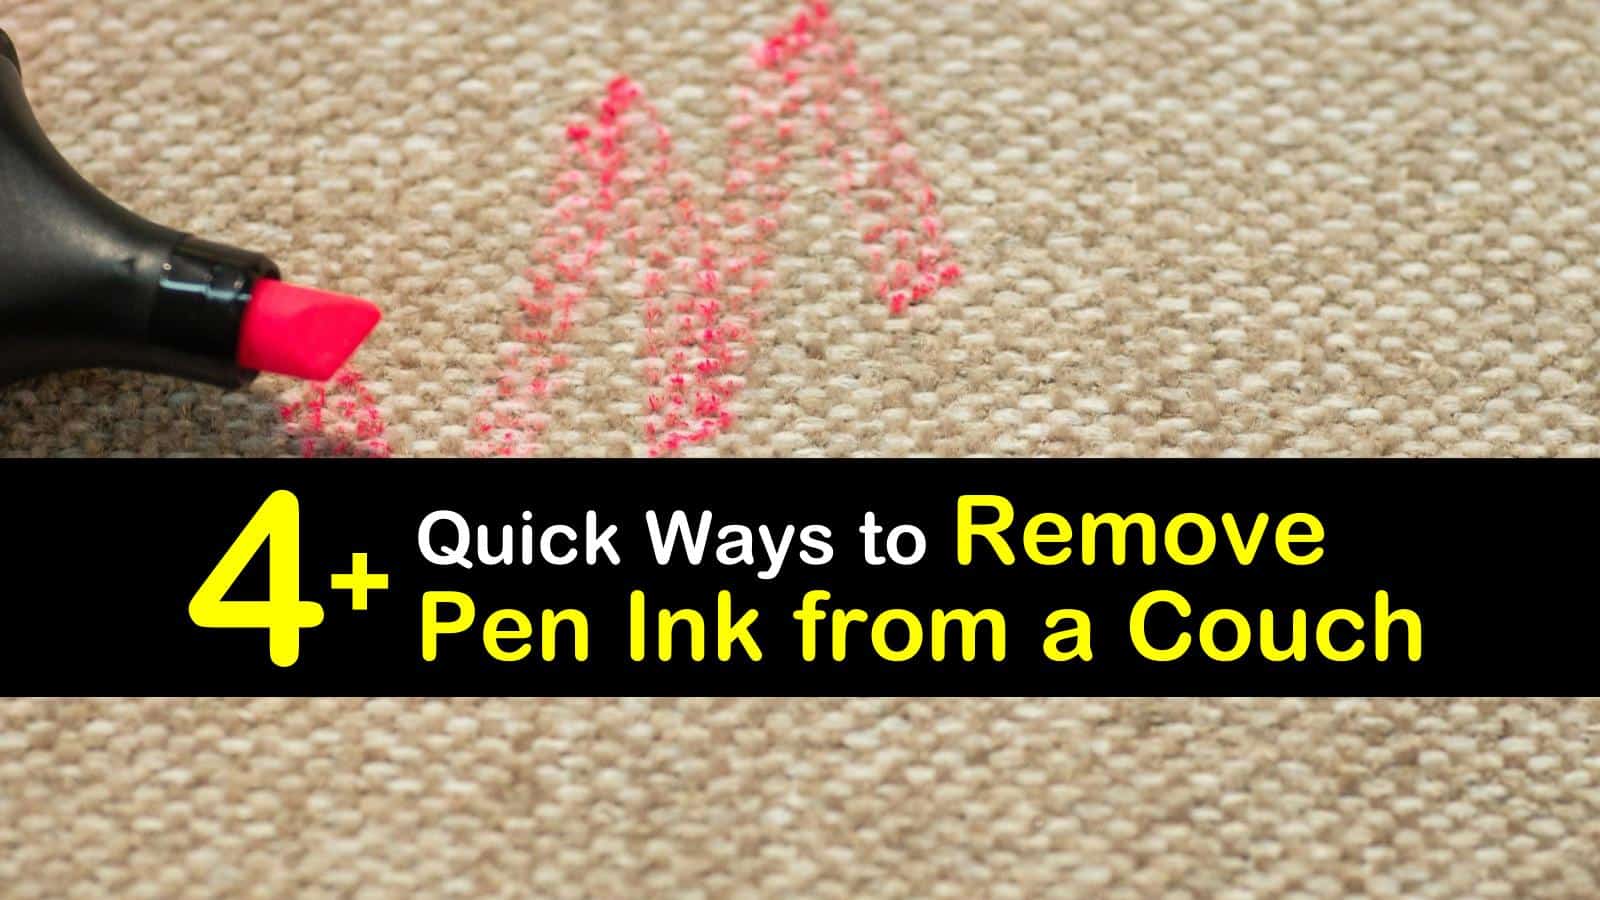 How To Remove Pen Ink From Fabric Couch - Galandrina